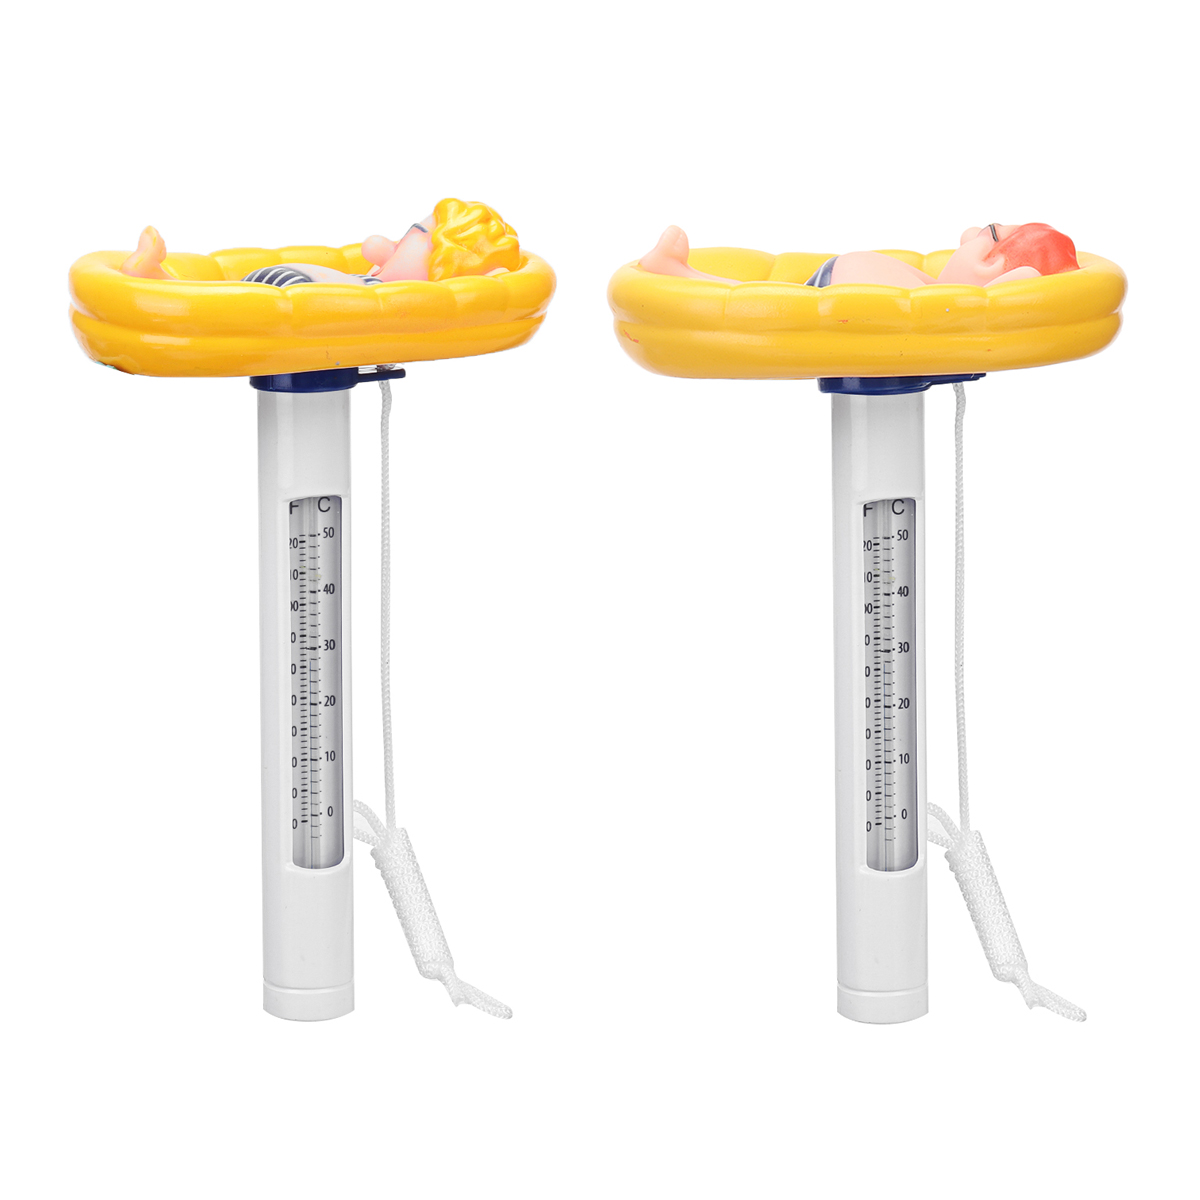 Cartoon-Shatter-Resistant-Floating-Pool-Thermometer-With-String-For-Swimming-Pools-Spas-Hot-Tubs-Wat-1934965-8